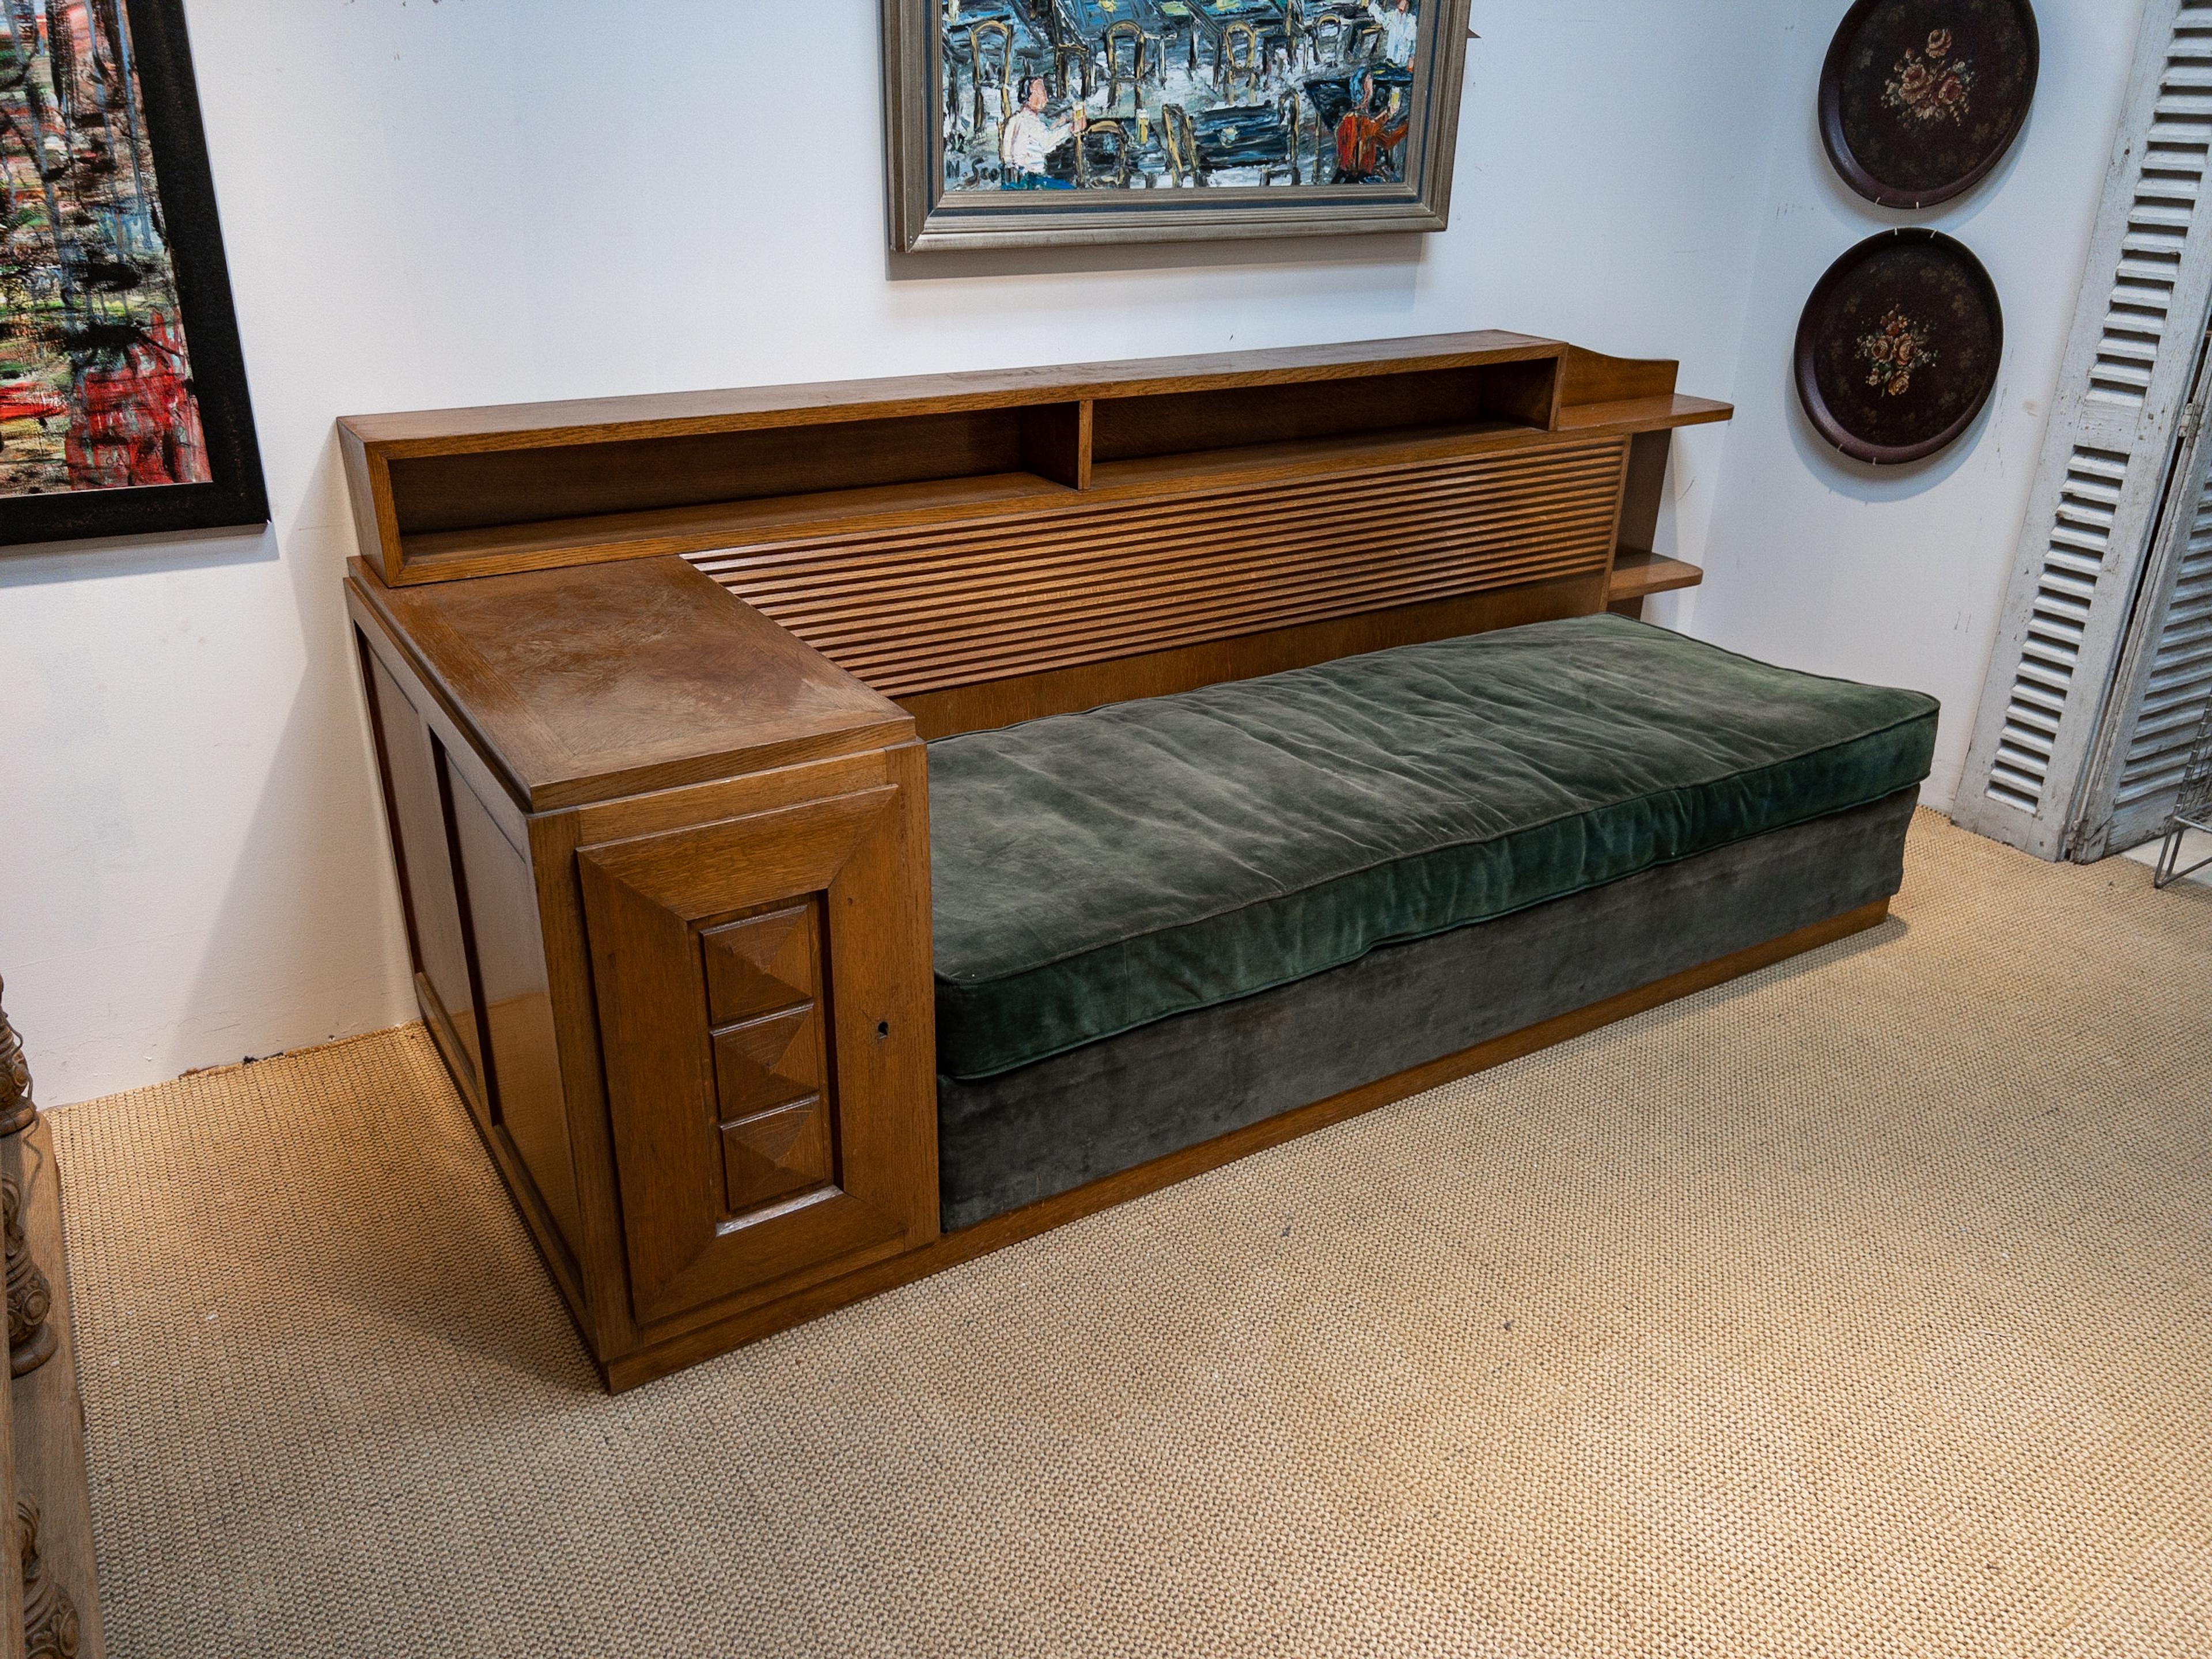 The 1920s Gaston Poisson day bed is an exquisite blend of form and function, a hallmark of the era's design ingenuity. This piece boasts a luxurious velvet upholstery that exudes both comfort and opulence, inviting repose in the lap of elegance. Its